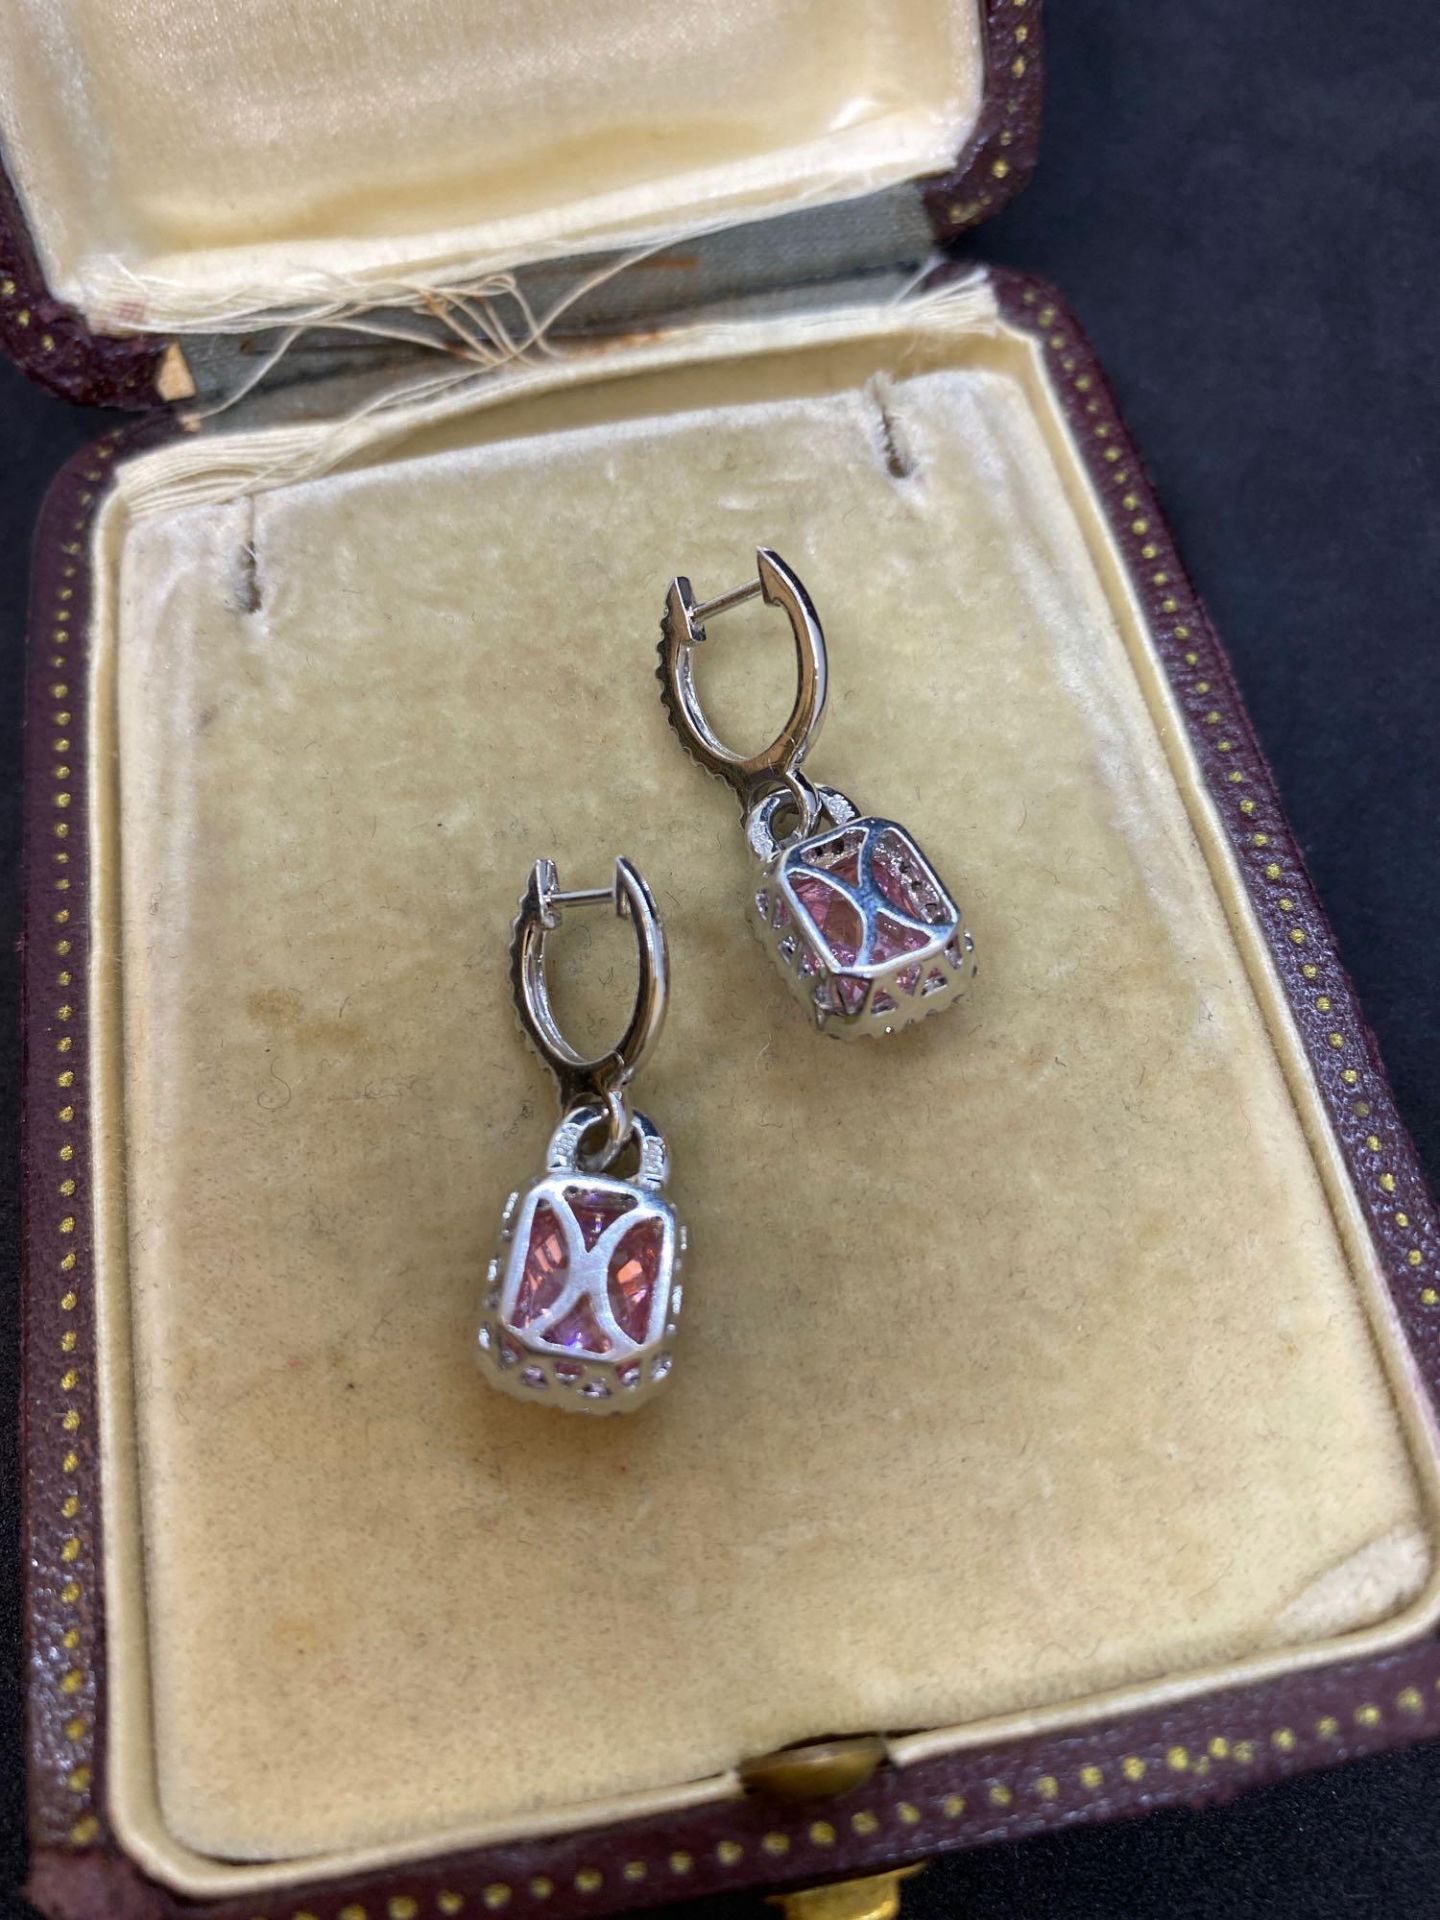 14ct White Gold 6.00ct Pink Topaz & 1.00ct Diamond Drop Earrings - 6 Grams - Image 3 of 3